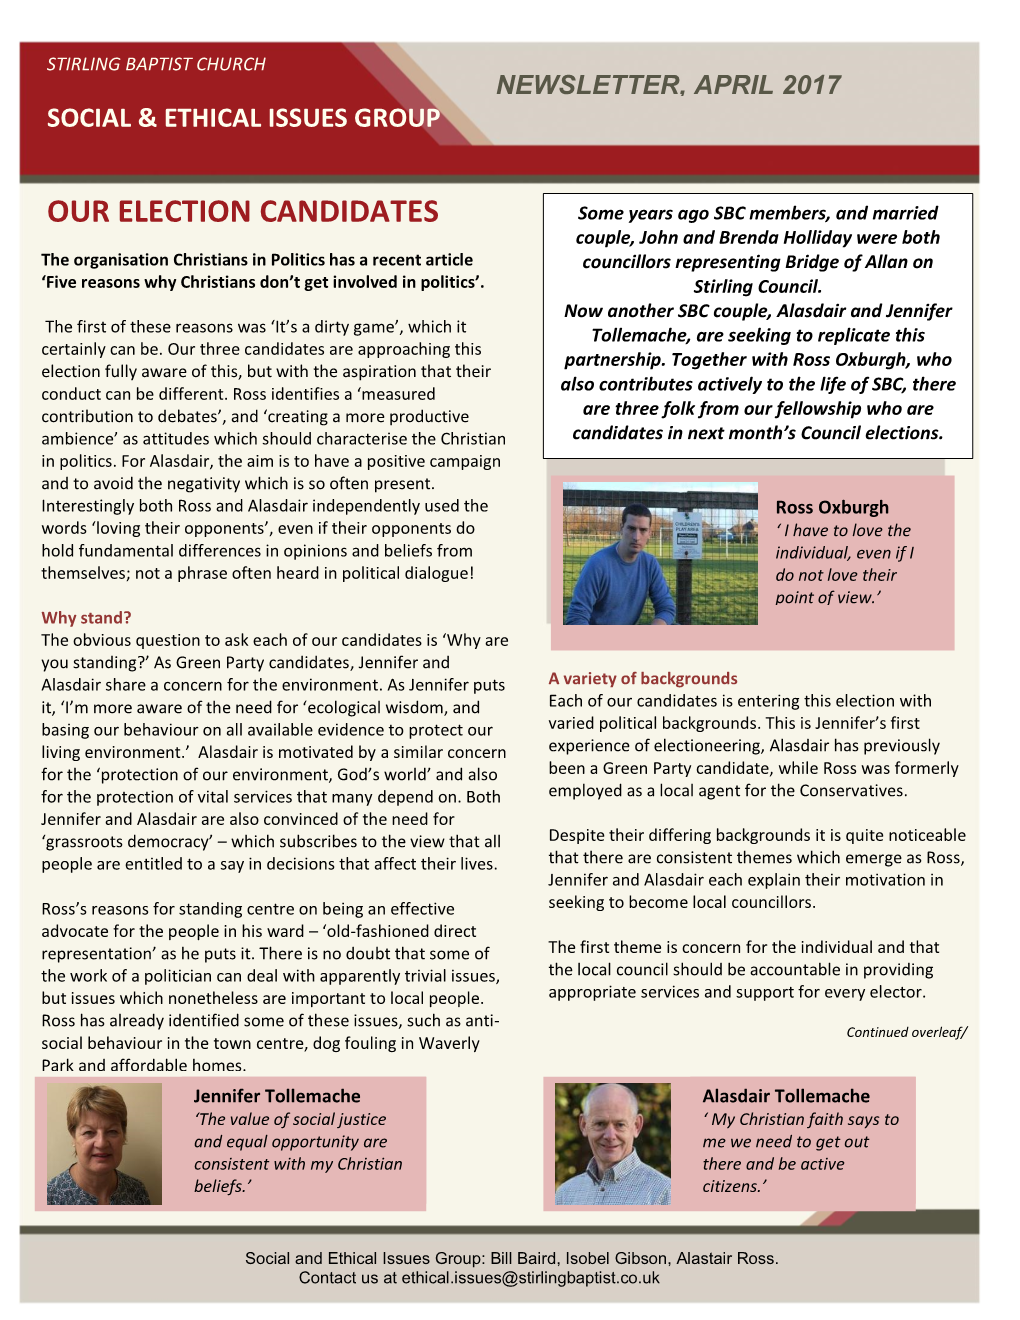 Our Election Candidates